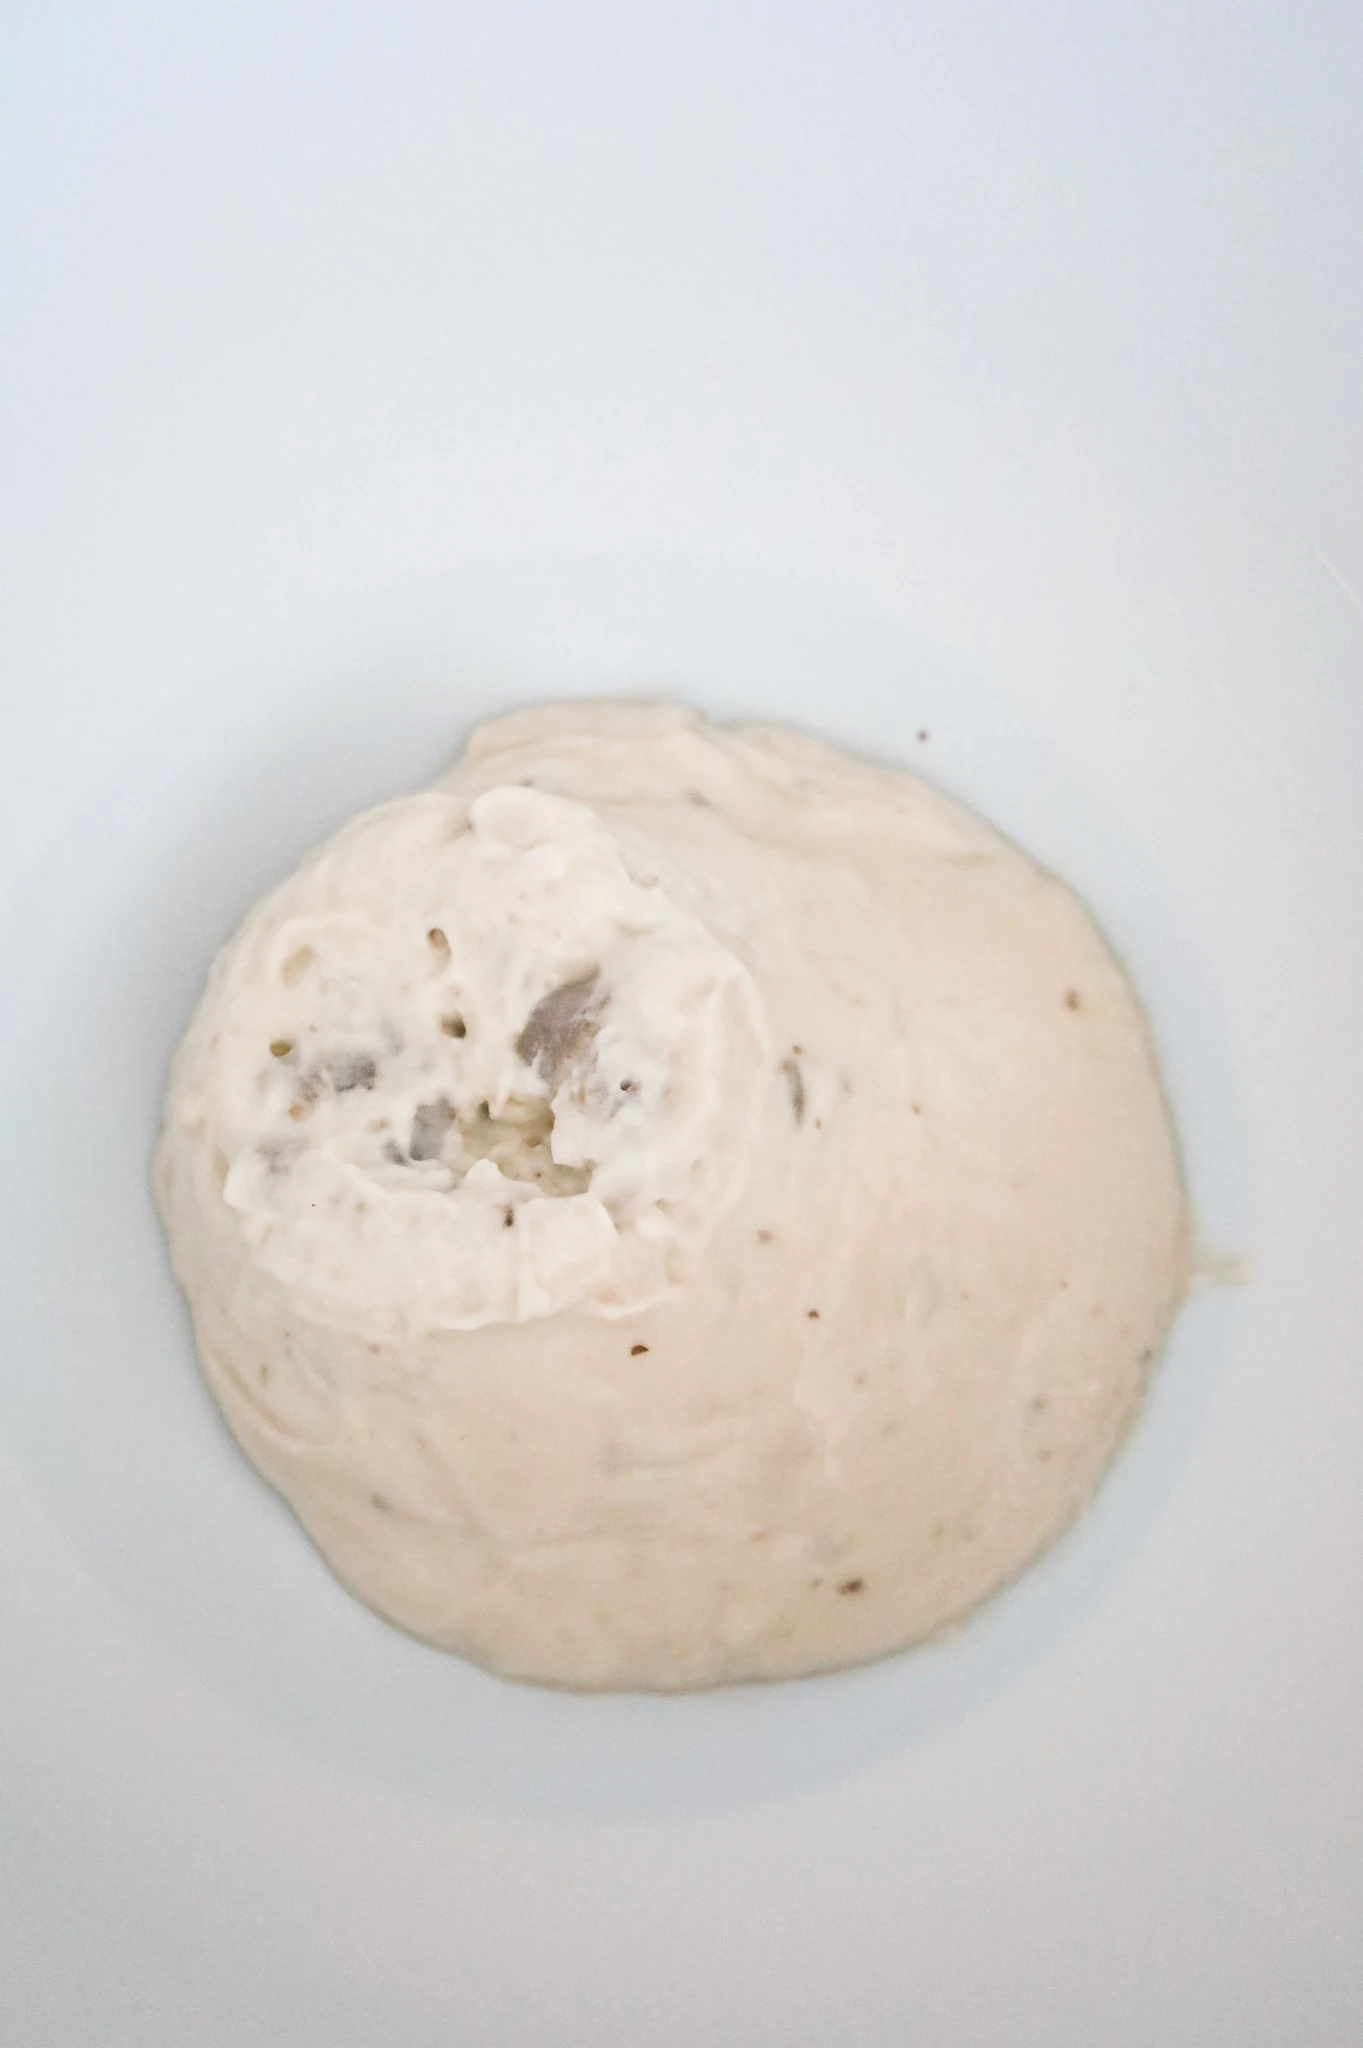 condensed cream of mushroom soup in a mixing bowl